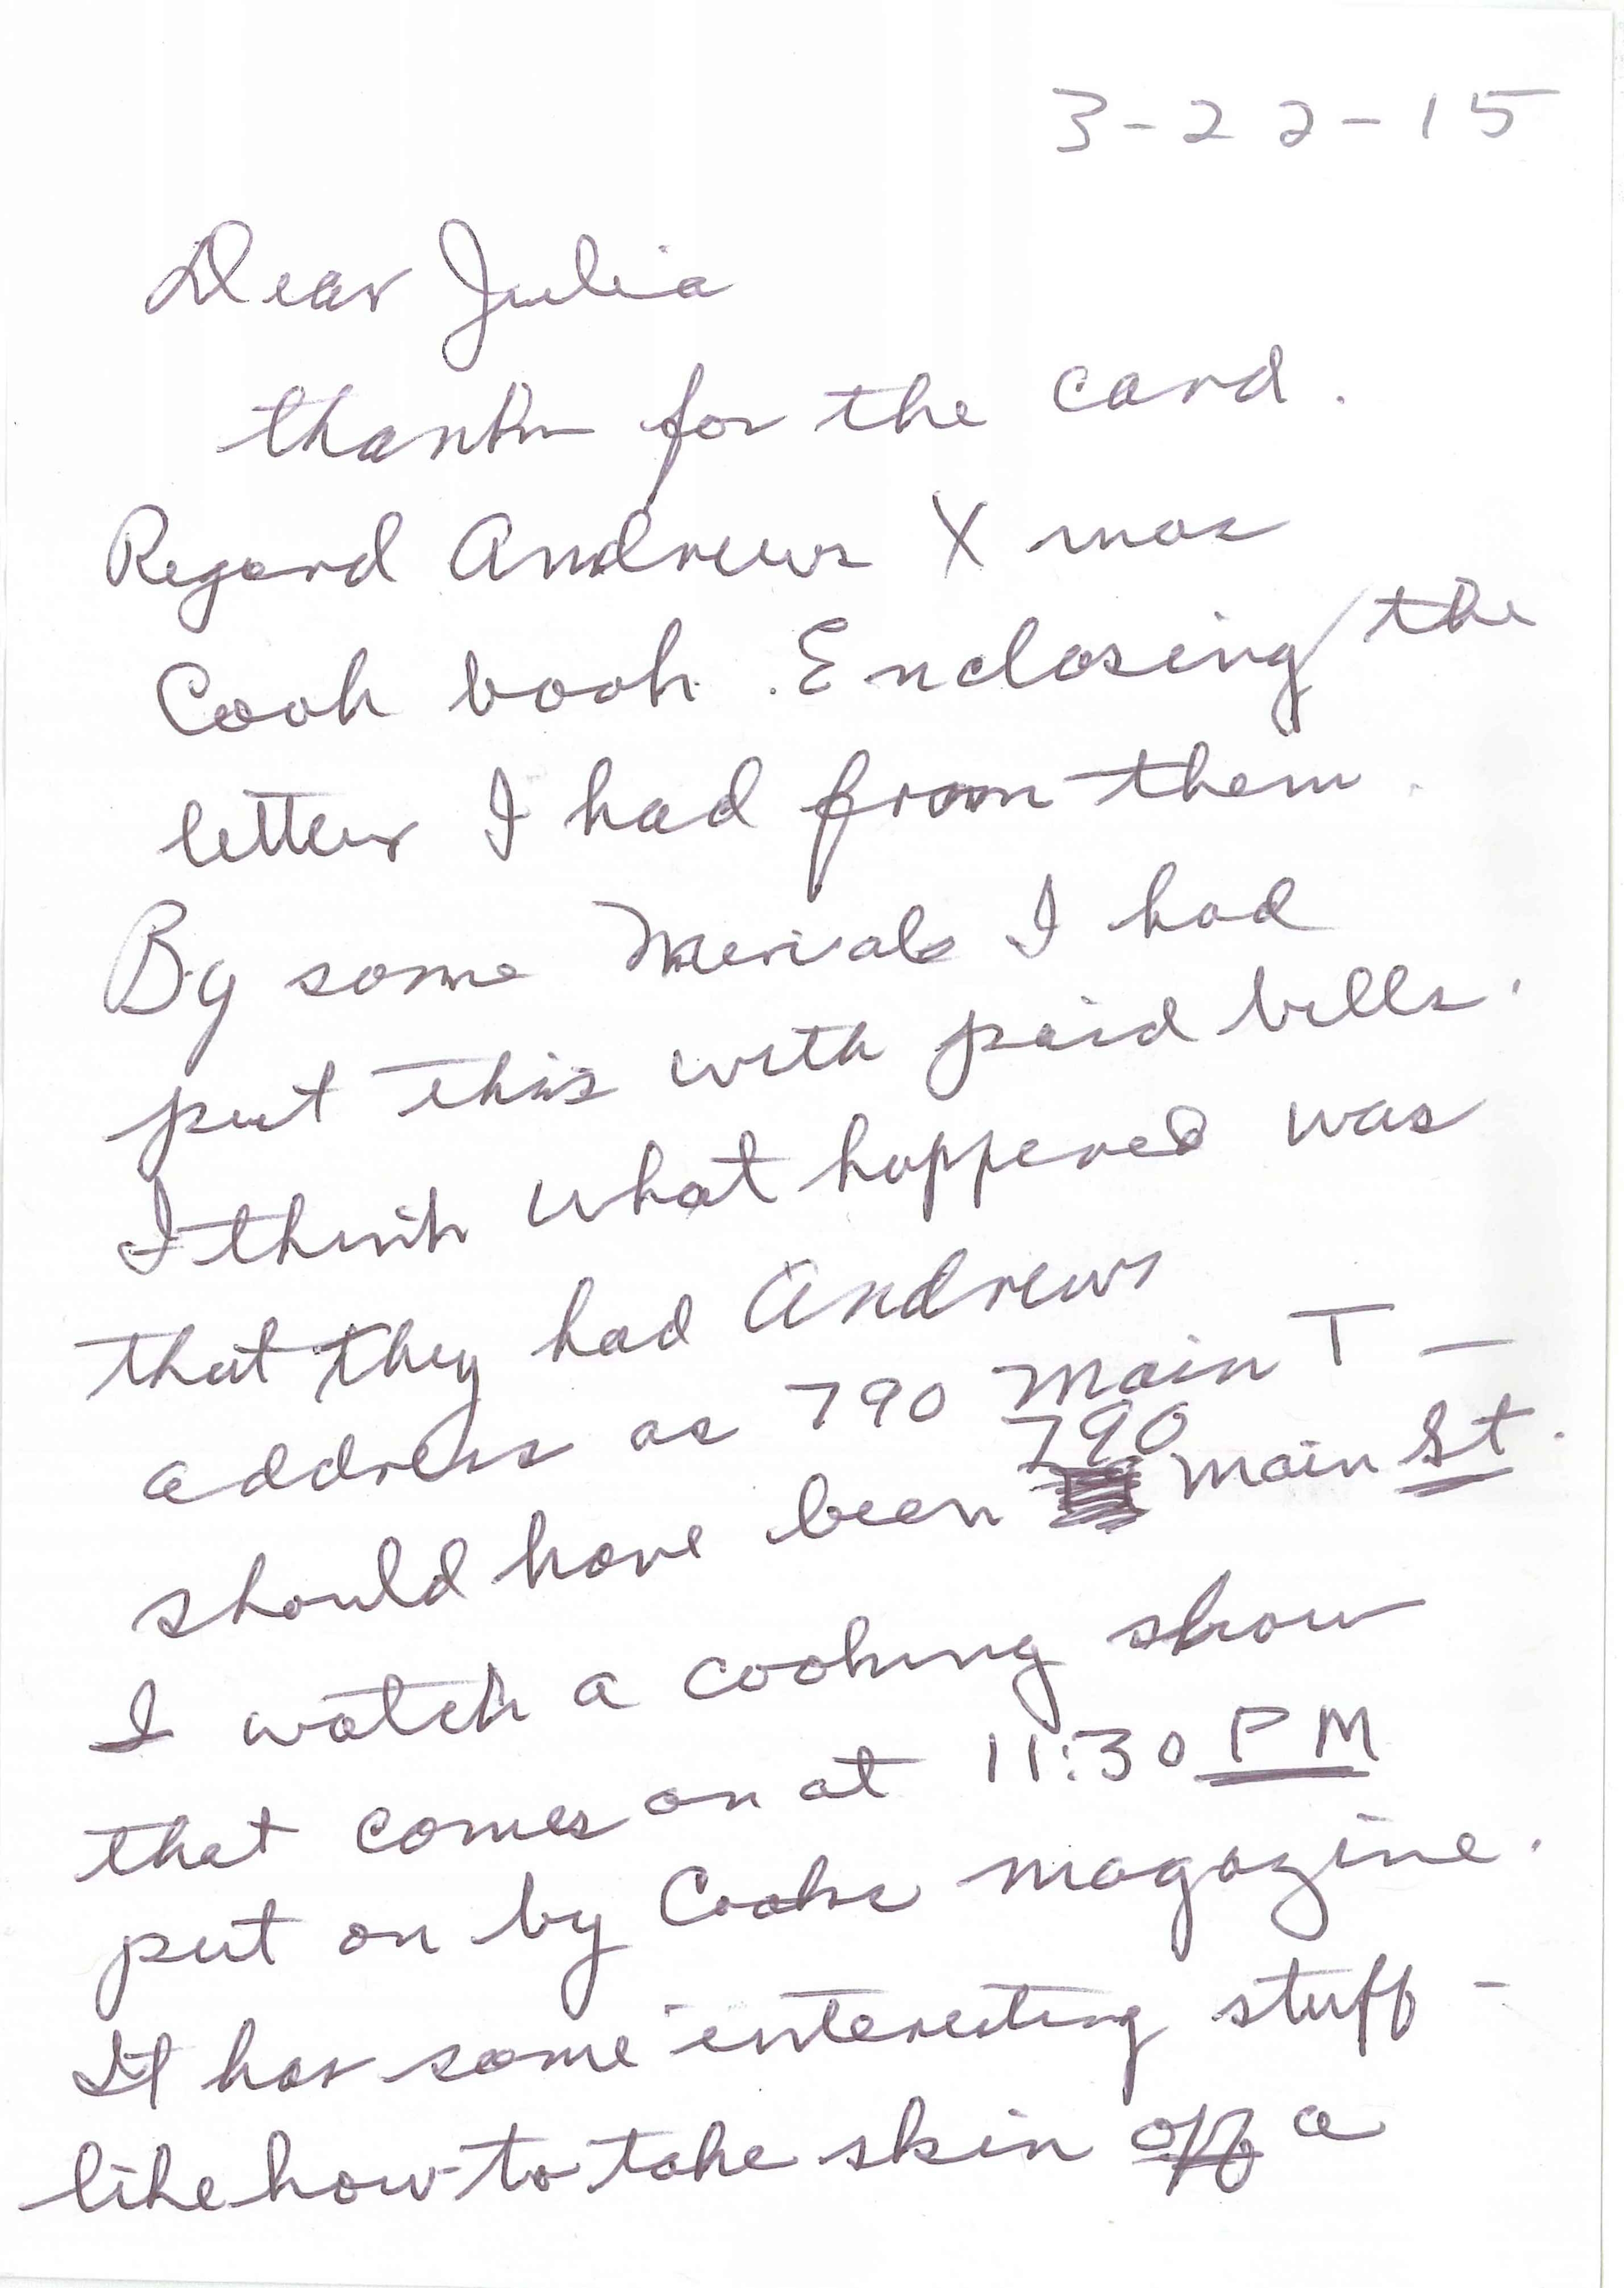 handwritten card text, side 1: 3-22-15
                    Dear Julia,
                    Thanks for the card. Respond Andrew’s Xmas cook book. Enclosing the letter I had from them. by some miracle, I had put this with paid bills. I think what happened was that they had Andrew’s address as 790 Main T—should have been 790 Main ST. I watch a cooking show that comes on a 11:30 PM put on by Cooks Magazine. It has some interesting stuff—like how to take skin OFF a